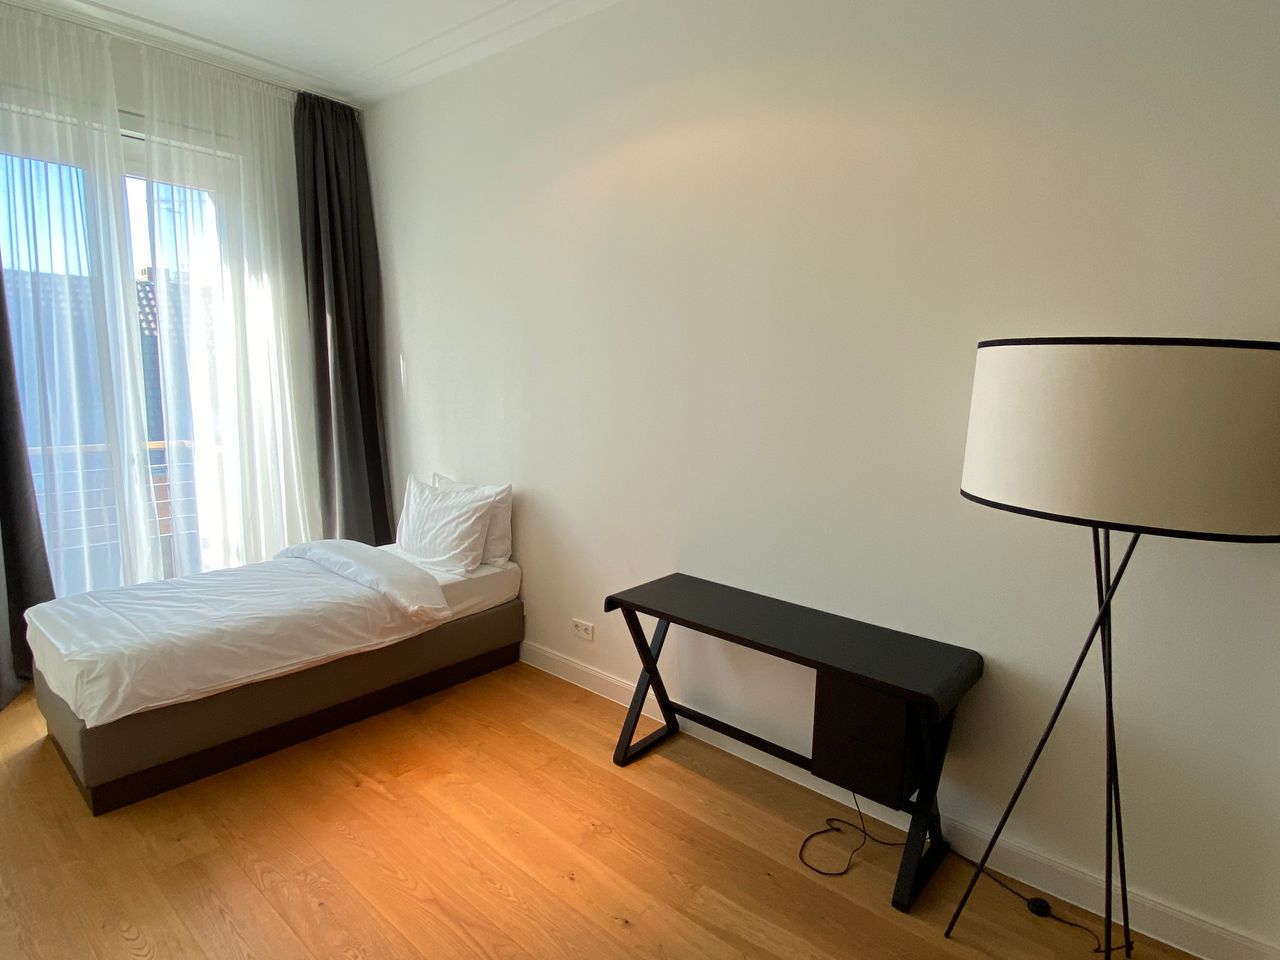 Luxury apartment in the middle of Düsseldorf city center, all inclusive!